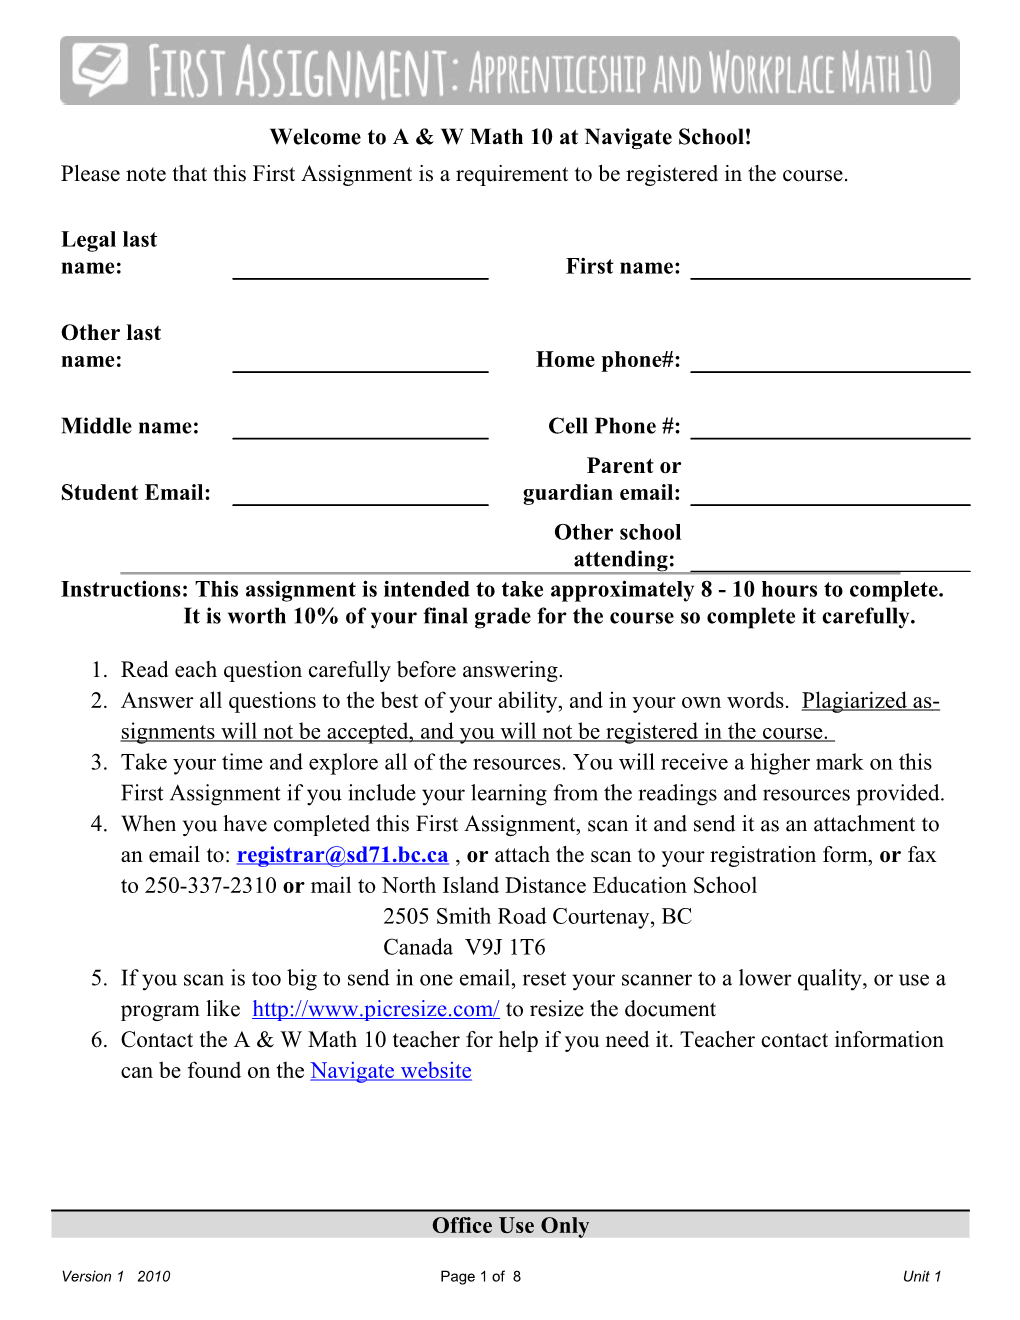 Send - in Assignment